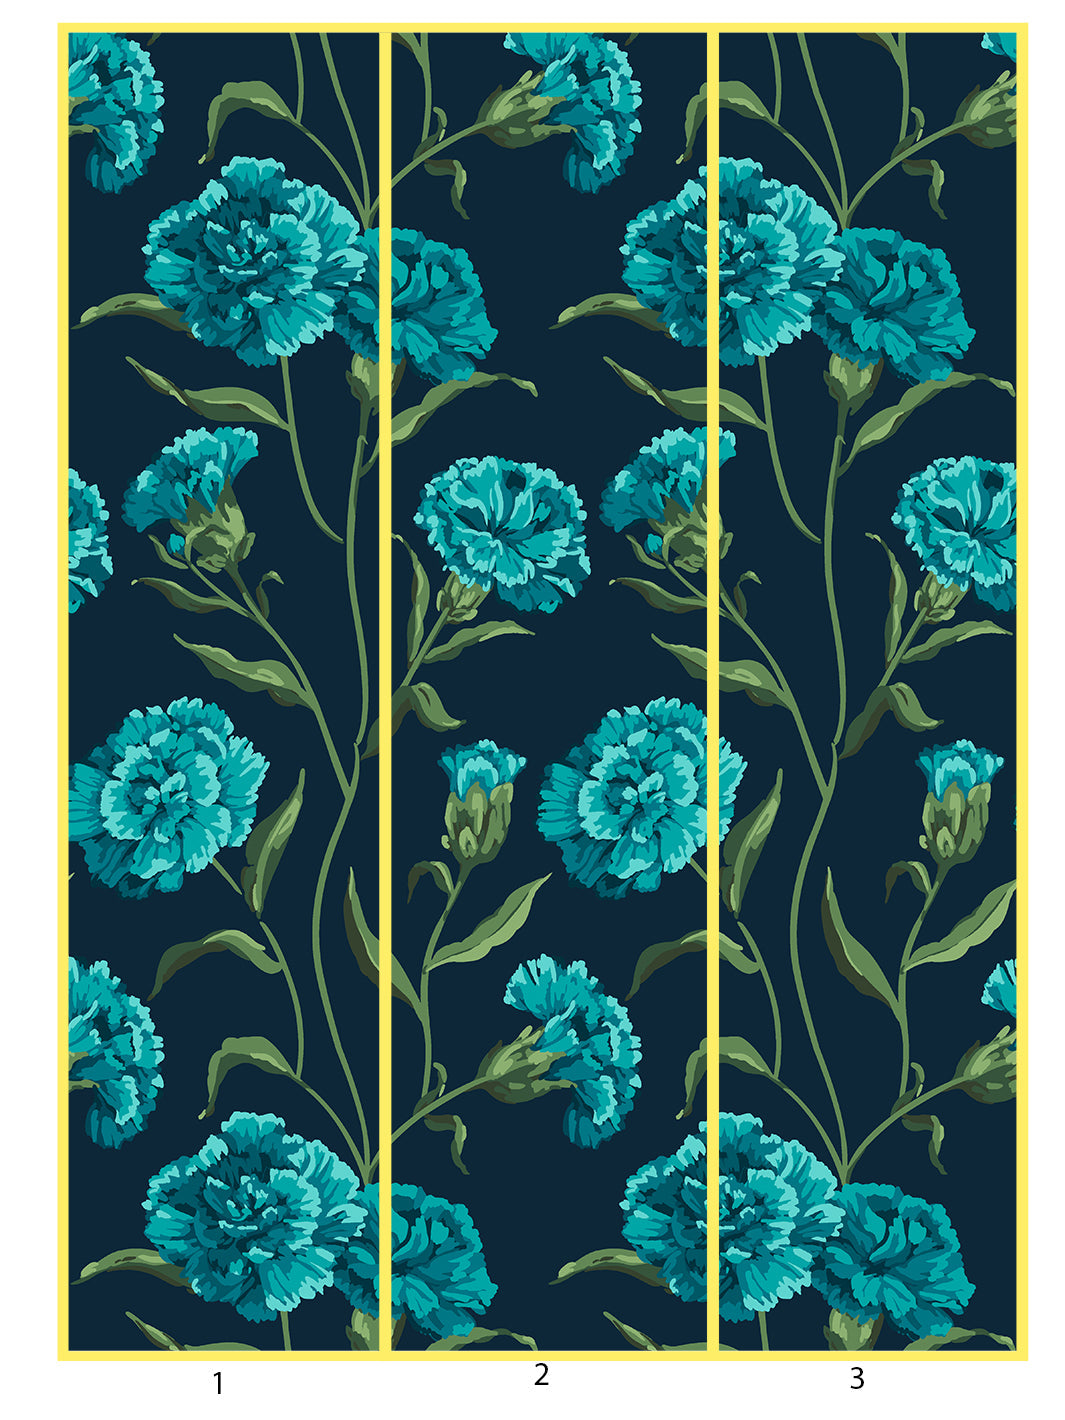 'Townhouse Mural' Wallpaper by Sarah Jessica Parker - Peacock on Deep Navy